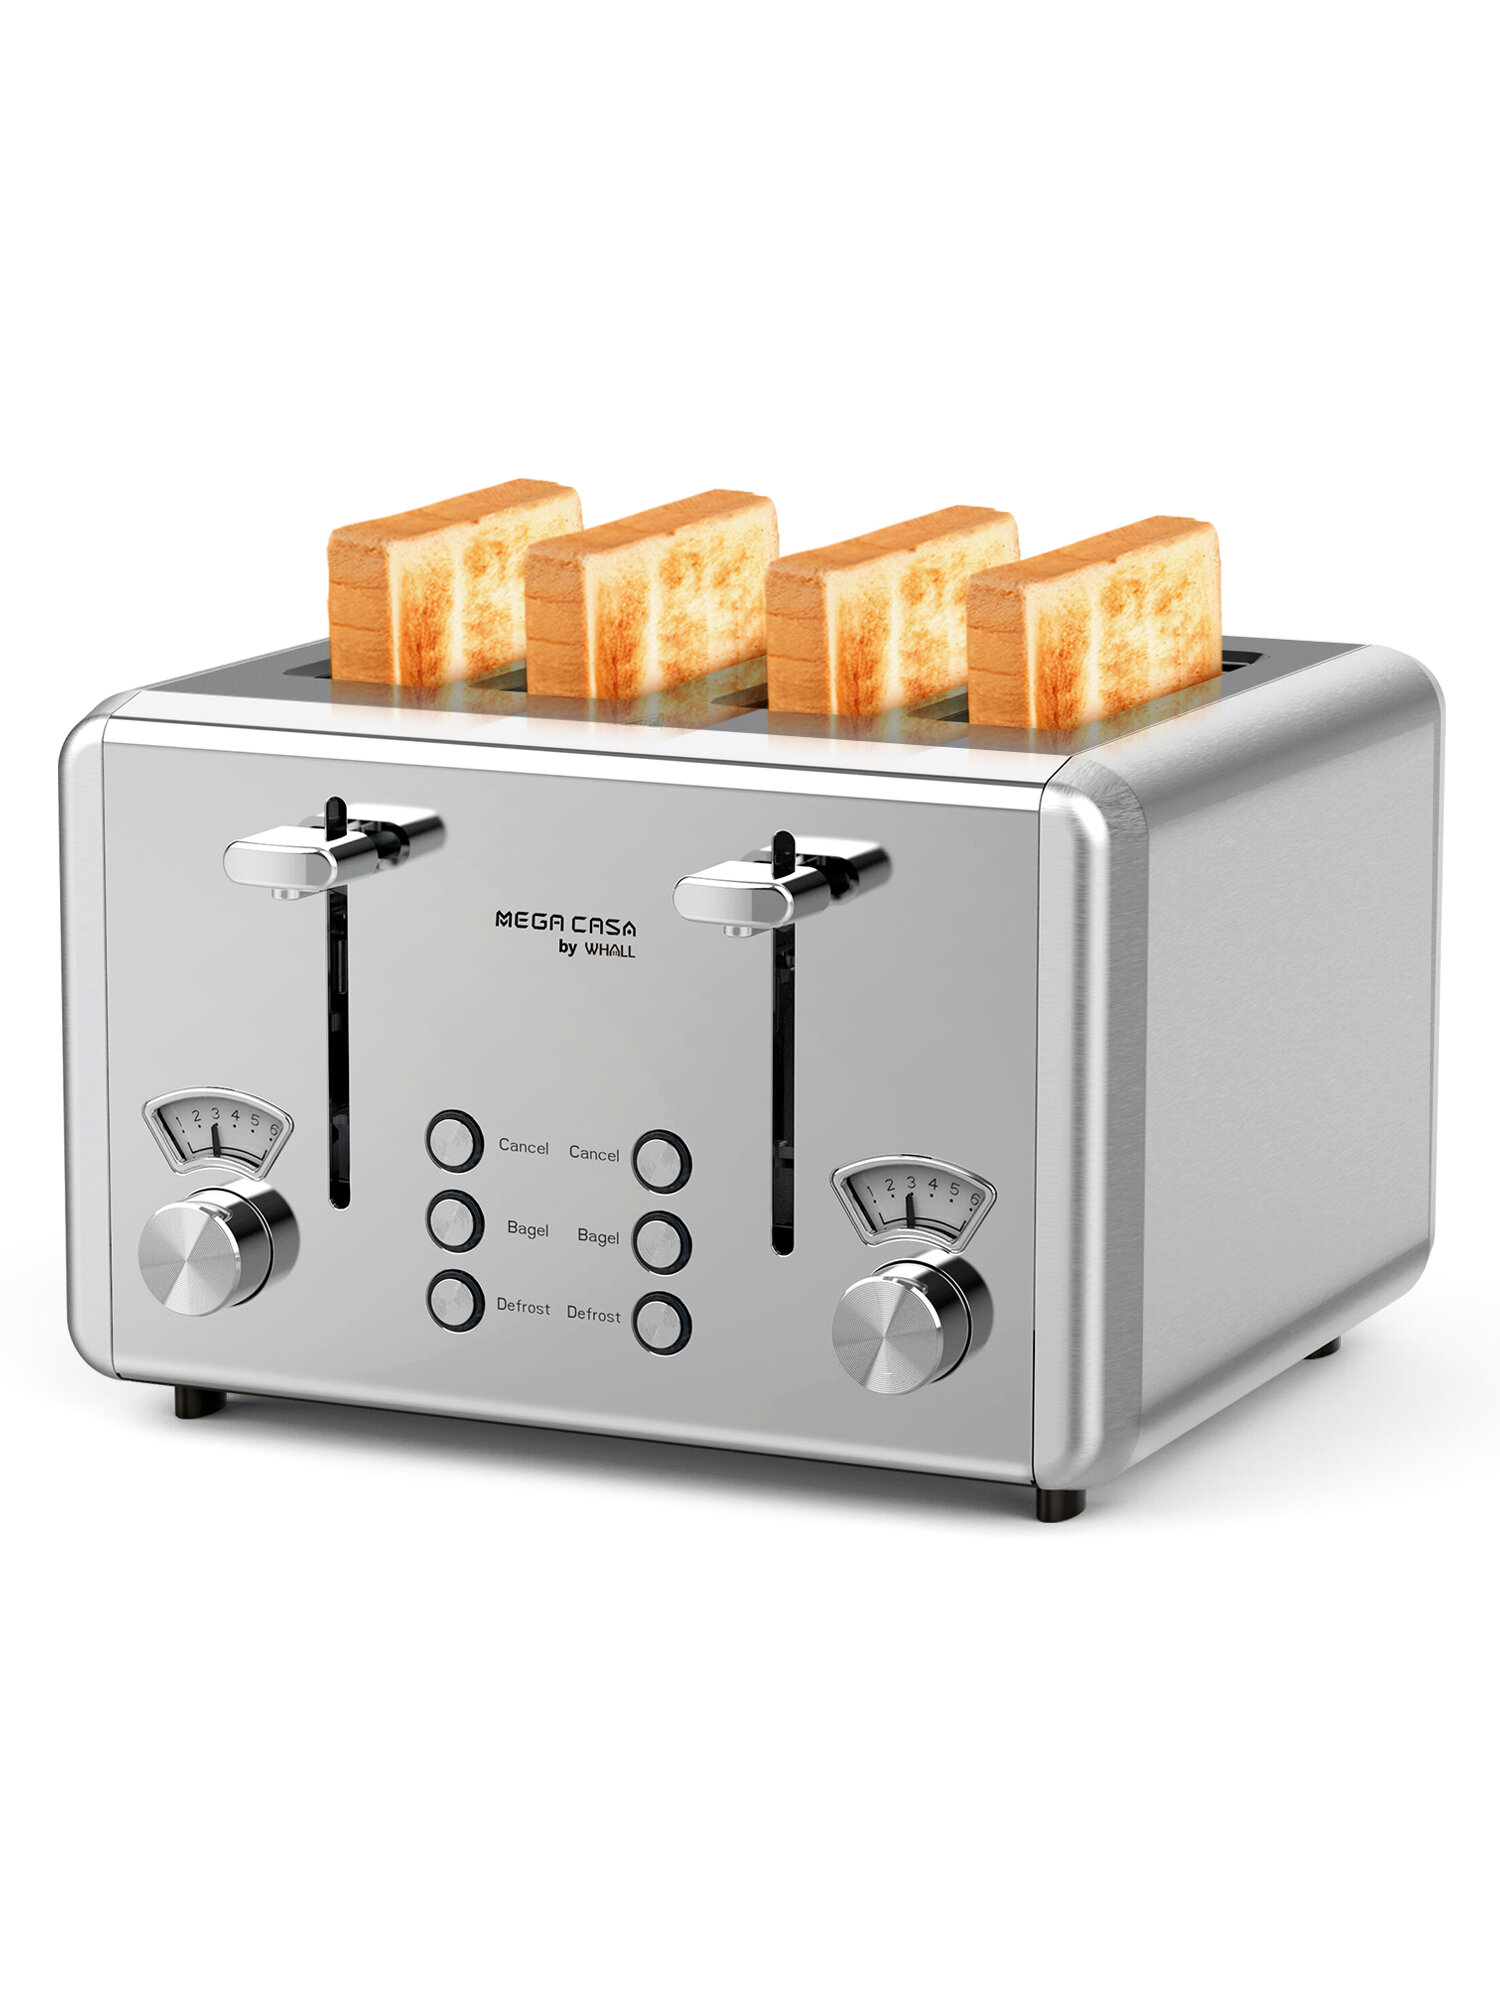 WHALL Long Slot Toaster 4 Slice Brushed Stainless Steel Toaster, 7 Toast  Settings with for $160 - T31269